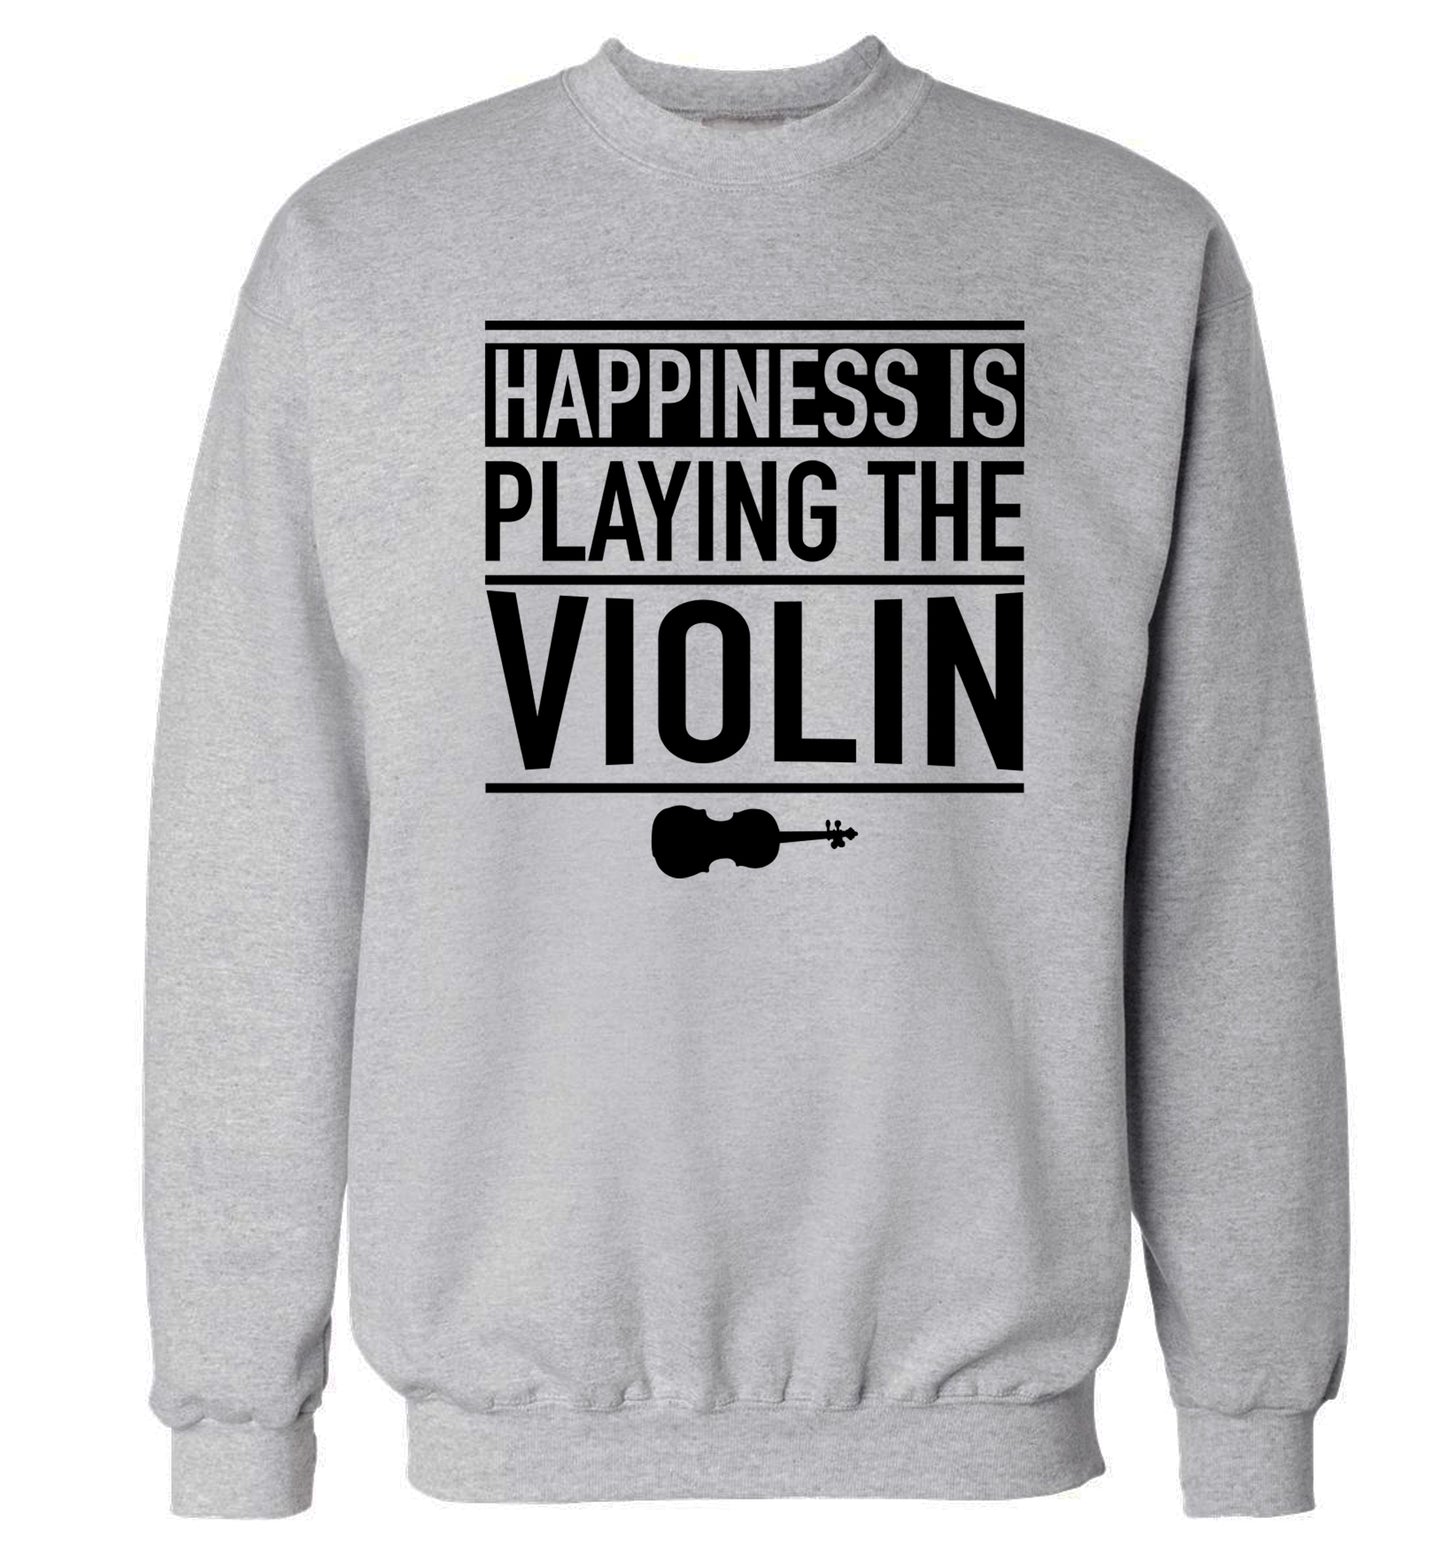 Happiness is playing the violin Adult's unisex grey Sweater 2XL